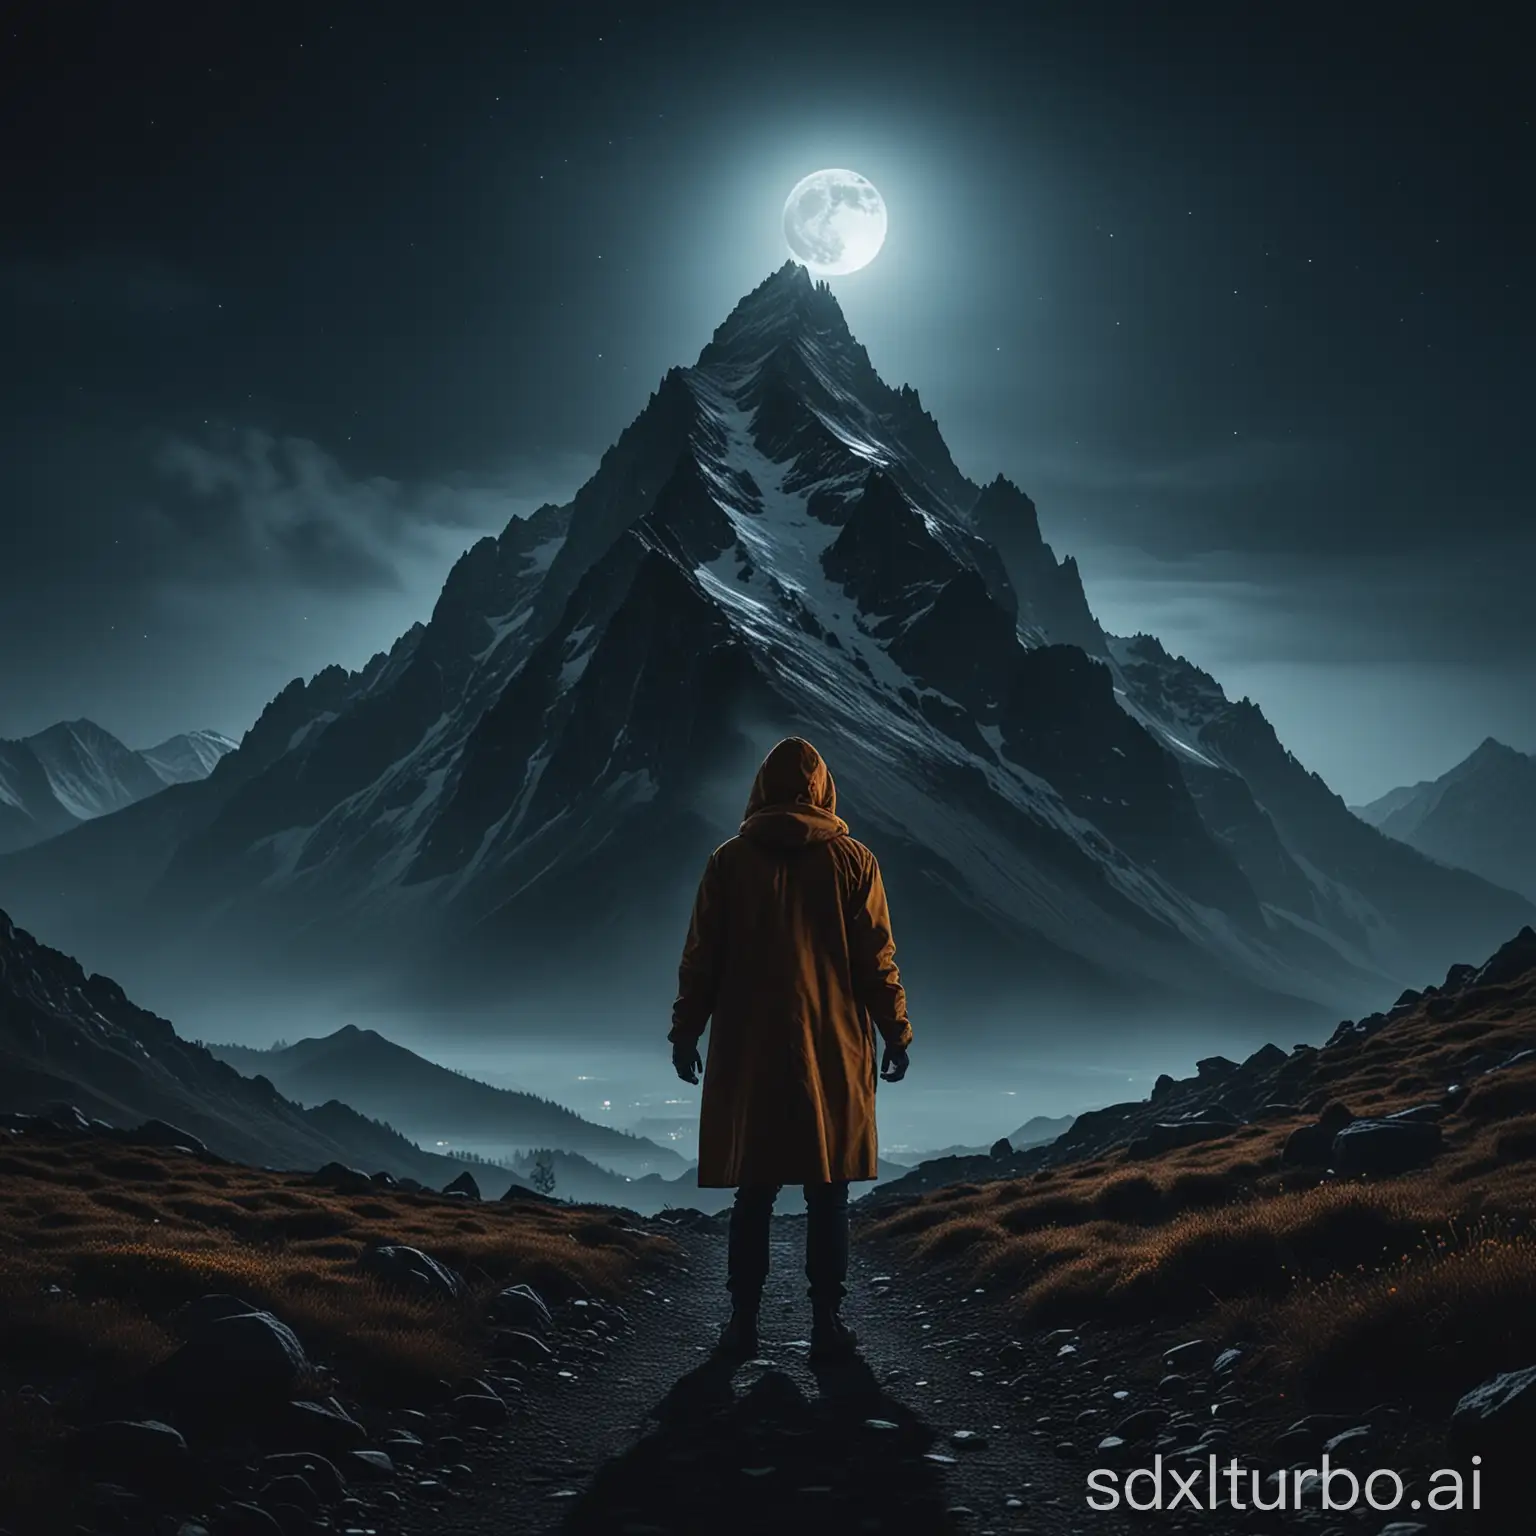 Create a square, 1:1 aspect ratio, high definition, scary image of a mountain scary story. The image must be photorealistic, mysterious, realistic people, scary stranger, weird, horror, scary, atmospheric, moonlight, vivid colors, catchy, must pop and catch attention. Shot on Sony Alpha a7R, 80mm.